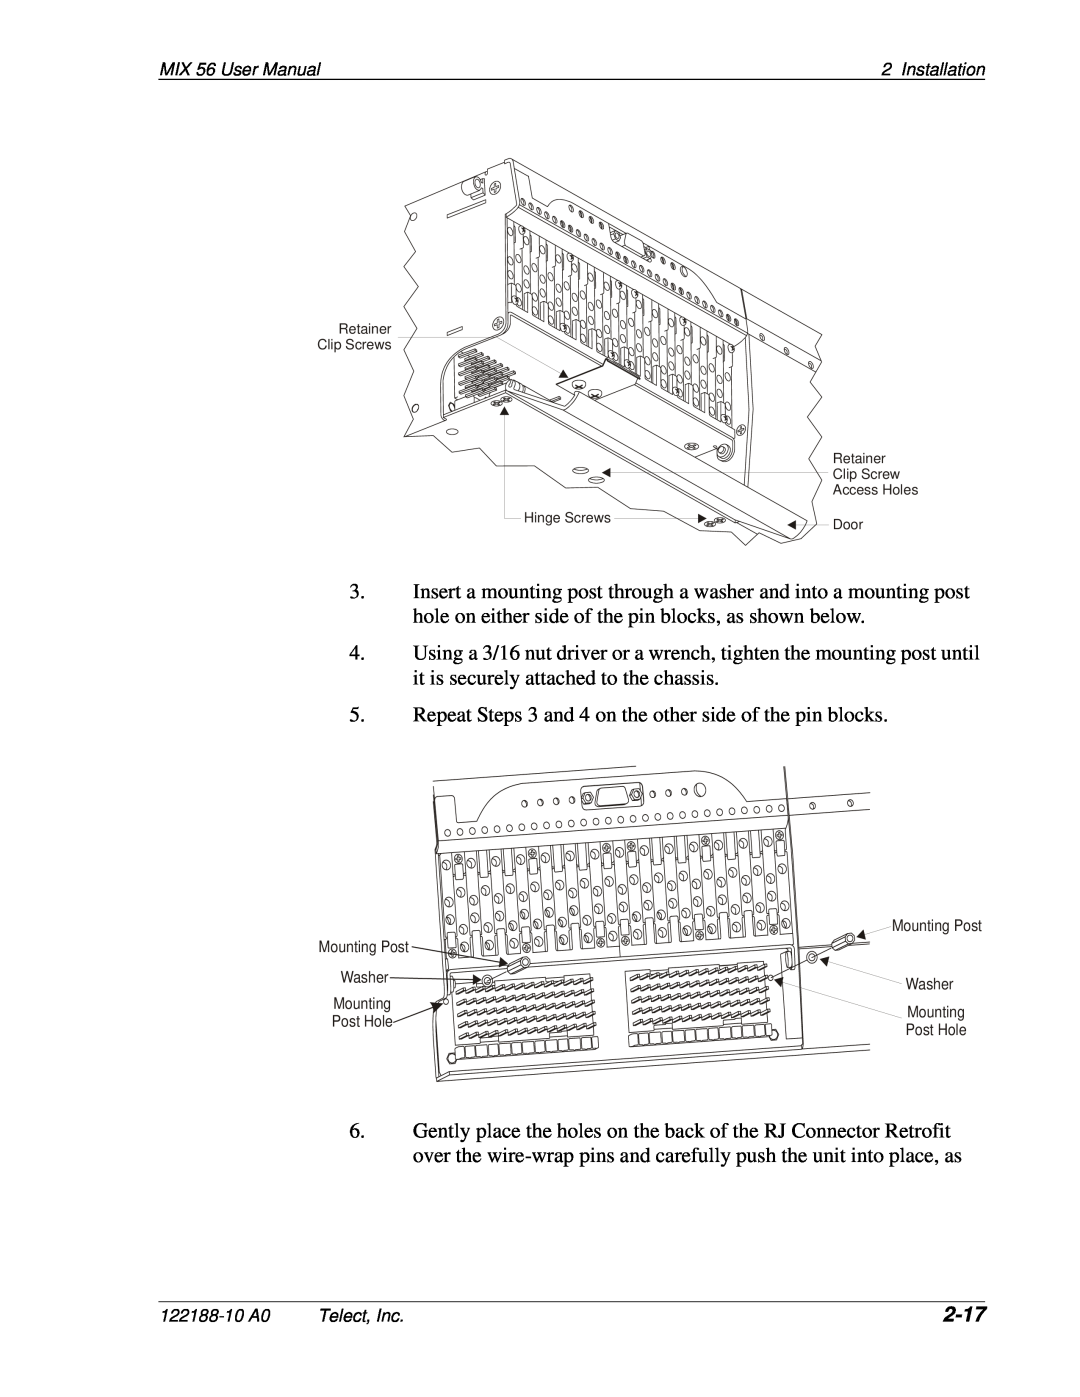 Telect MIX 56 user manual 2-17, Repeat Steps 3 and 4 on the other side of the pin blocks 